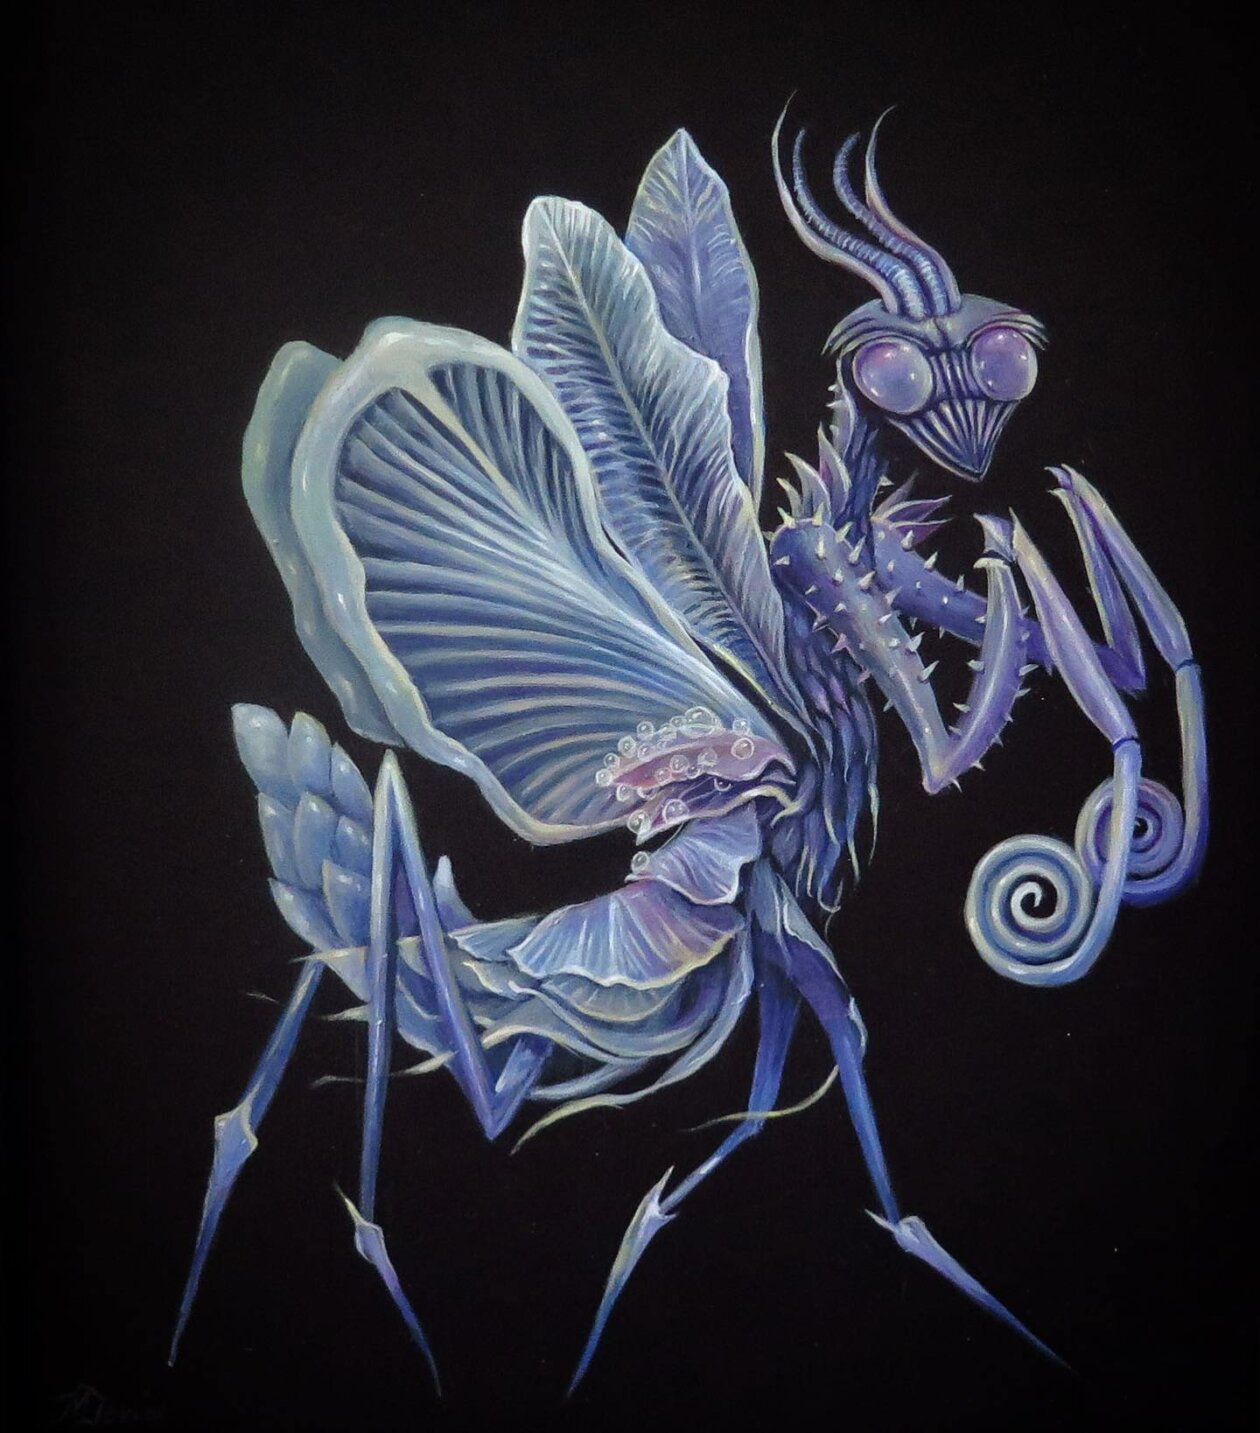 Surrealistic Portrait Paintings Of Animals Composed Of Translucent Botanics By Molly Devlin (1)